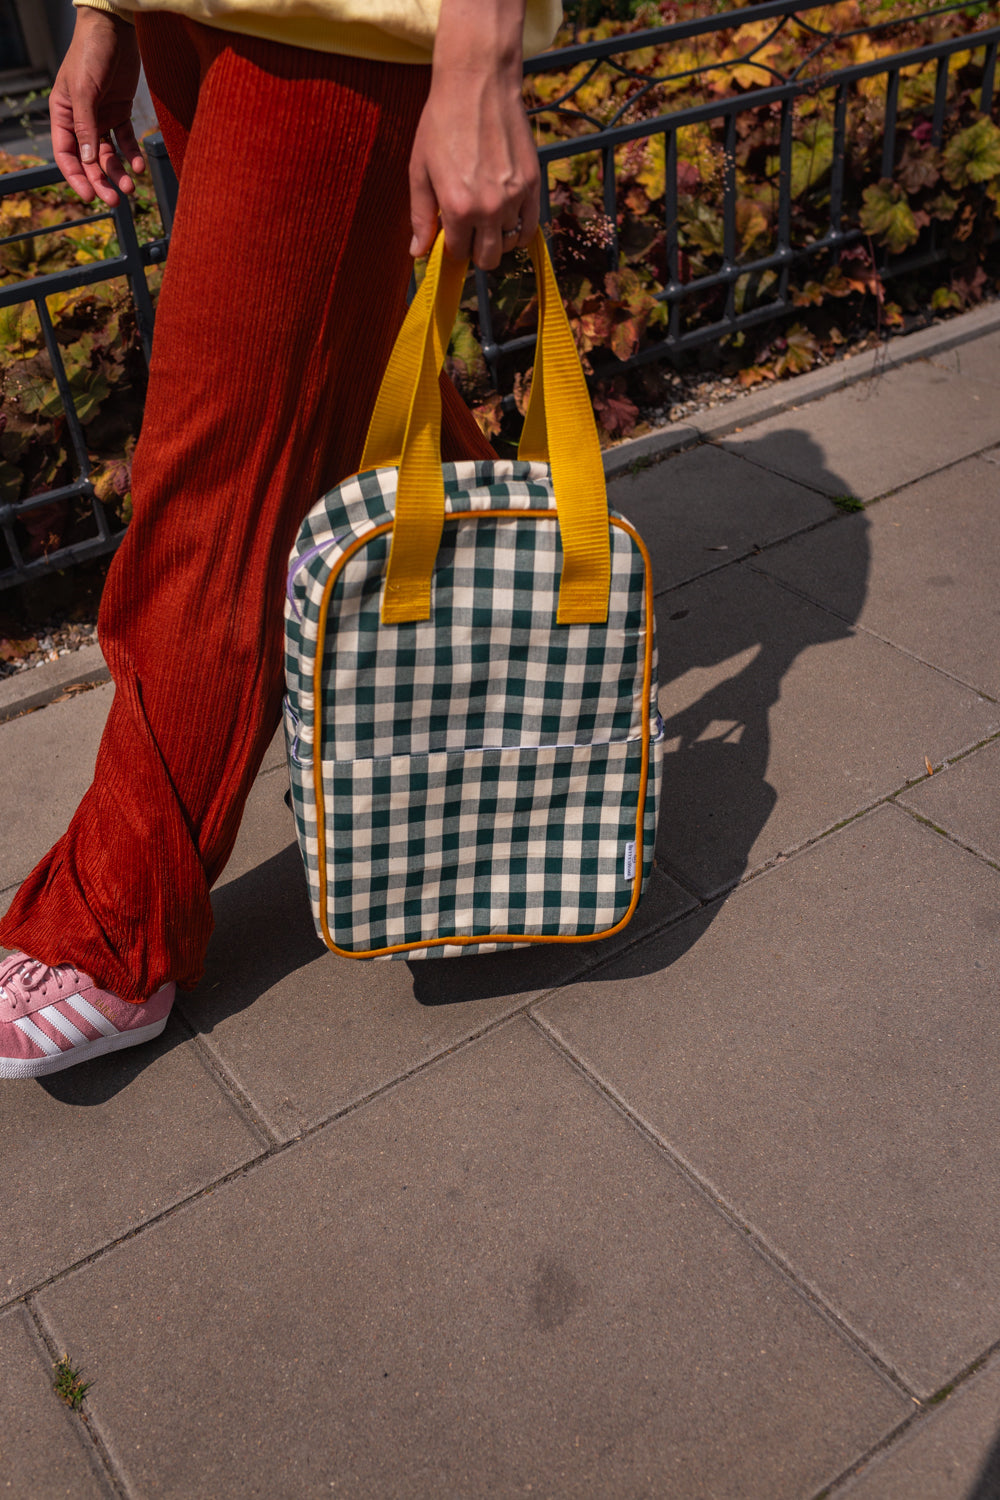 Green gingham backpack by bettys home. school checkered backpack for teenager's 